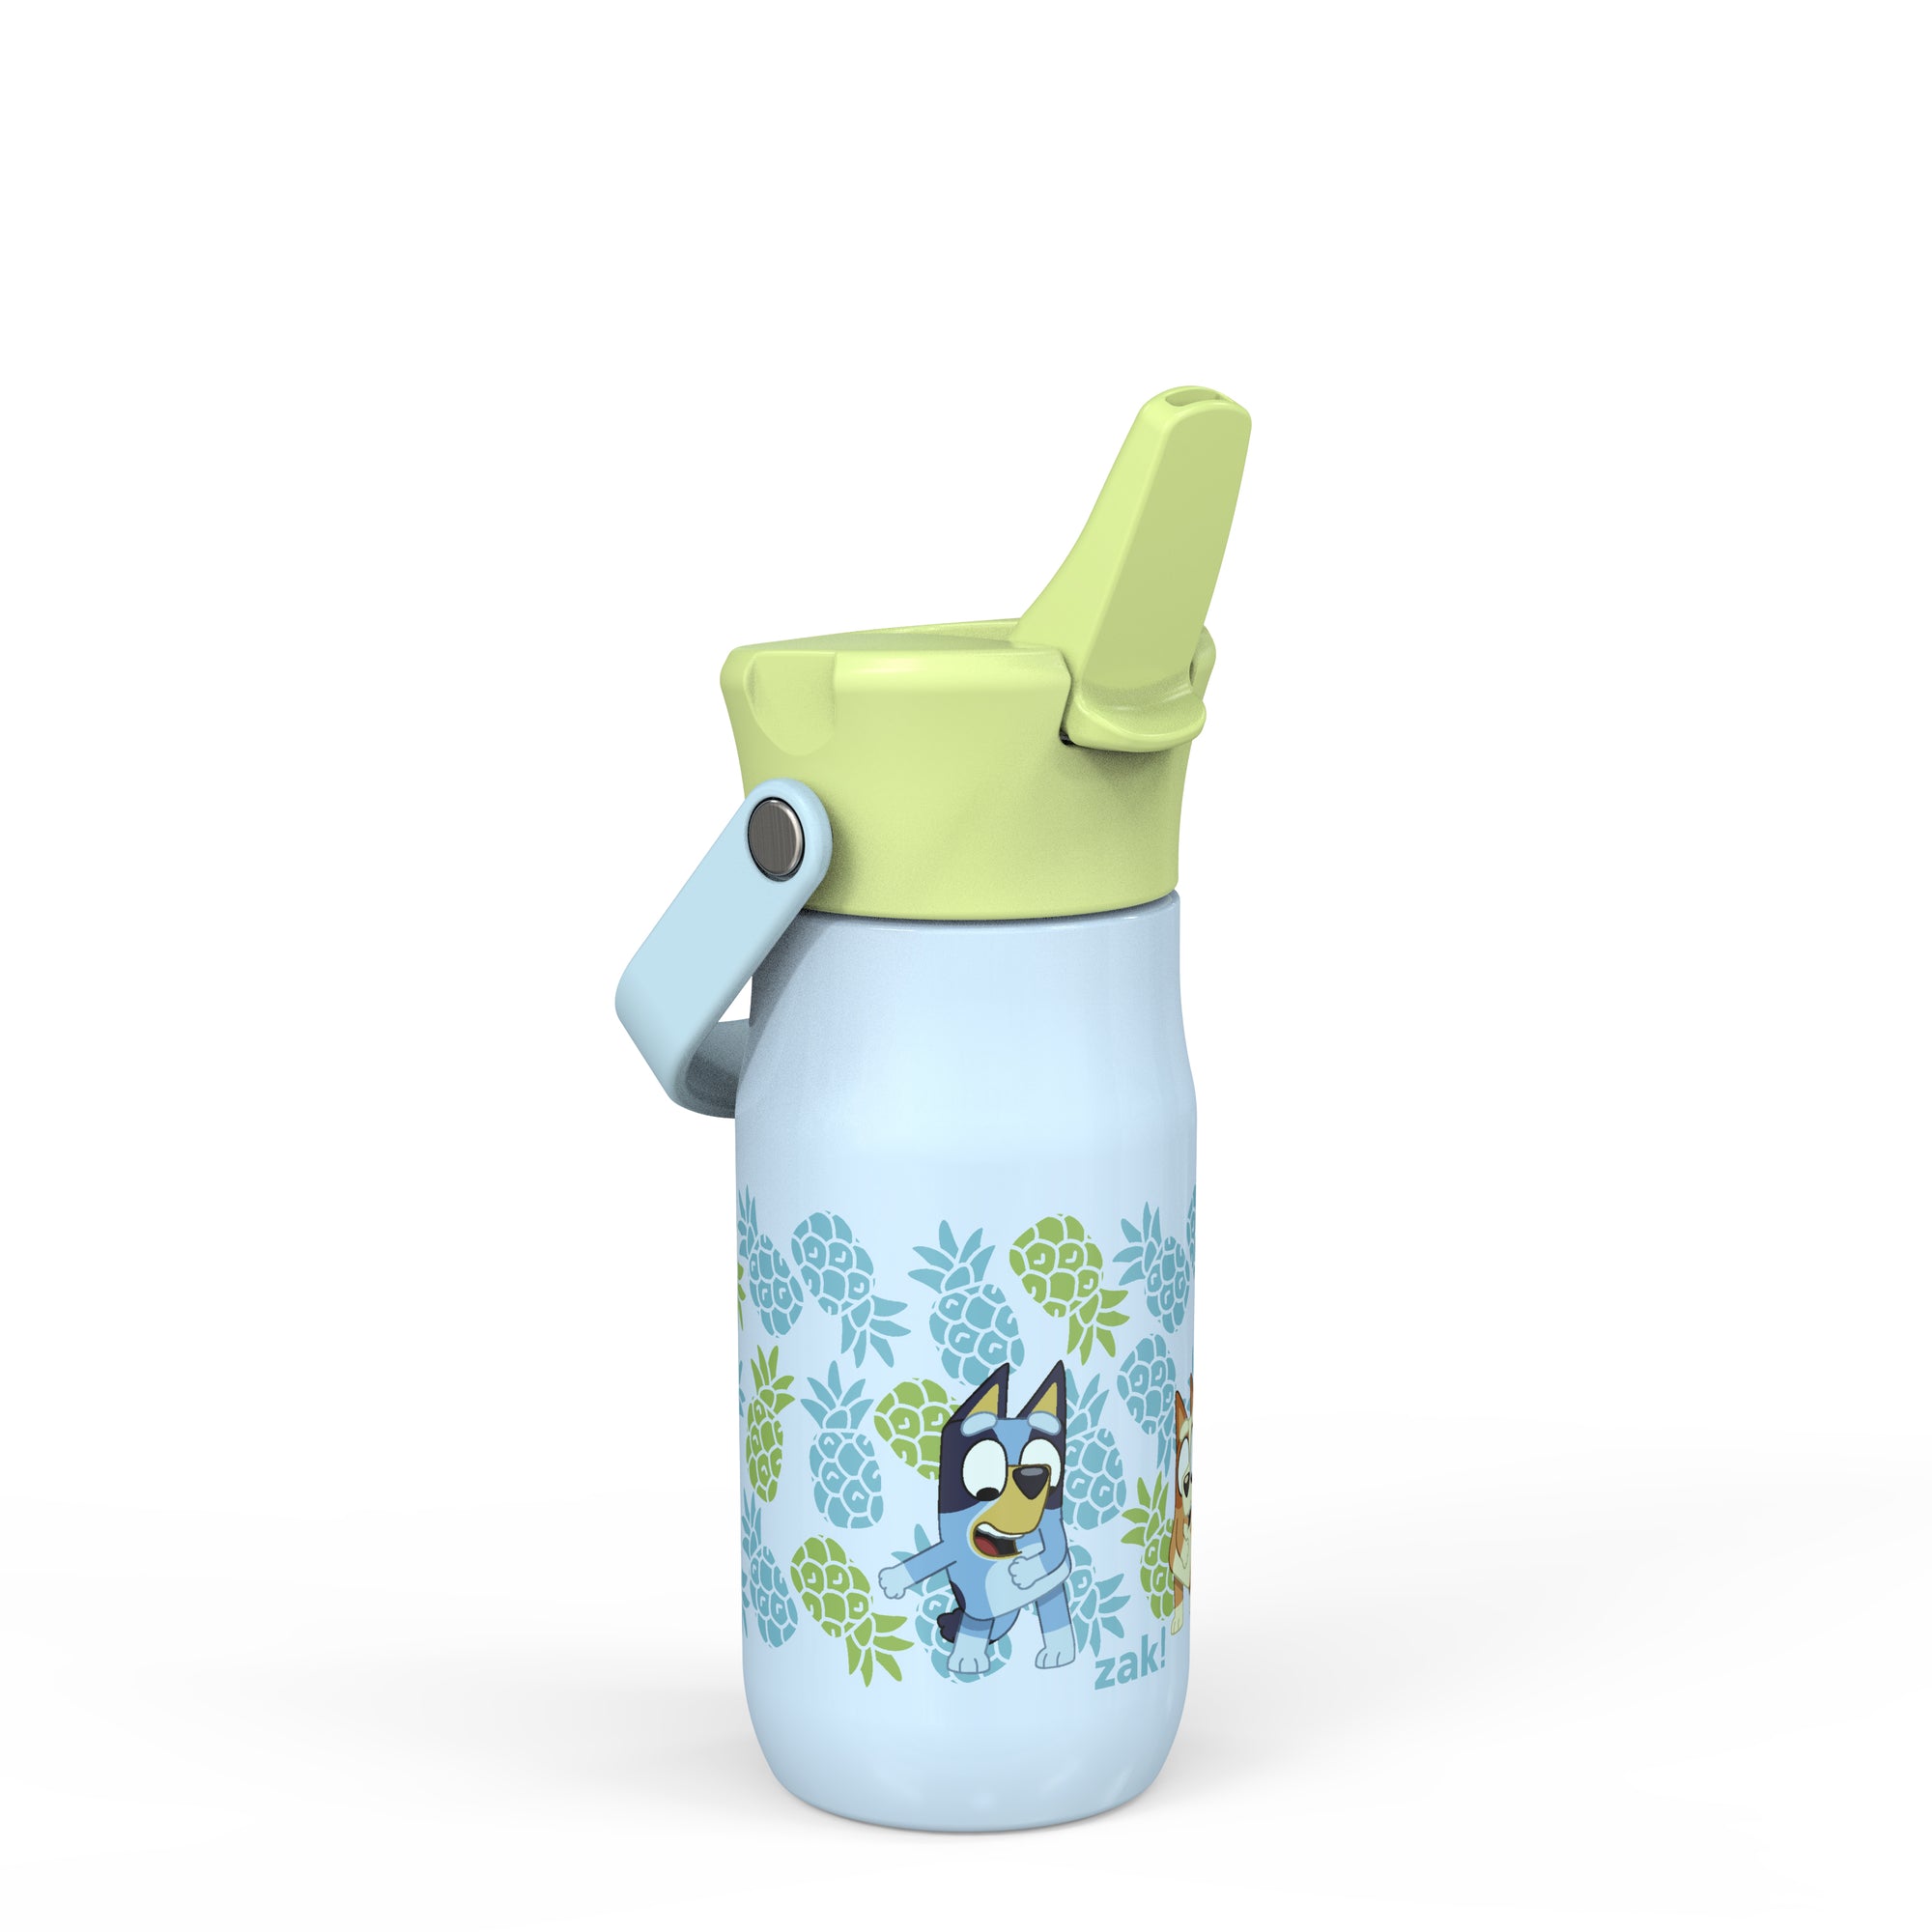 Bluey Harmony Recycled Stainless Steel Kids Water Bottle with Straw Spout, 14 ounces